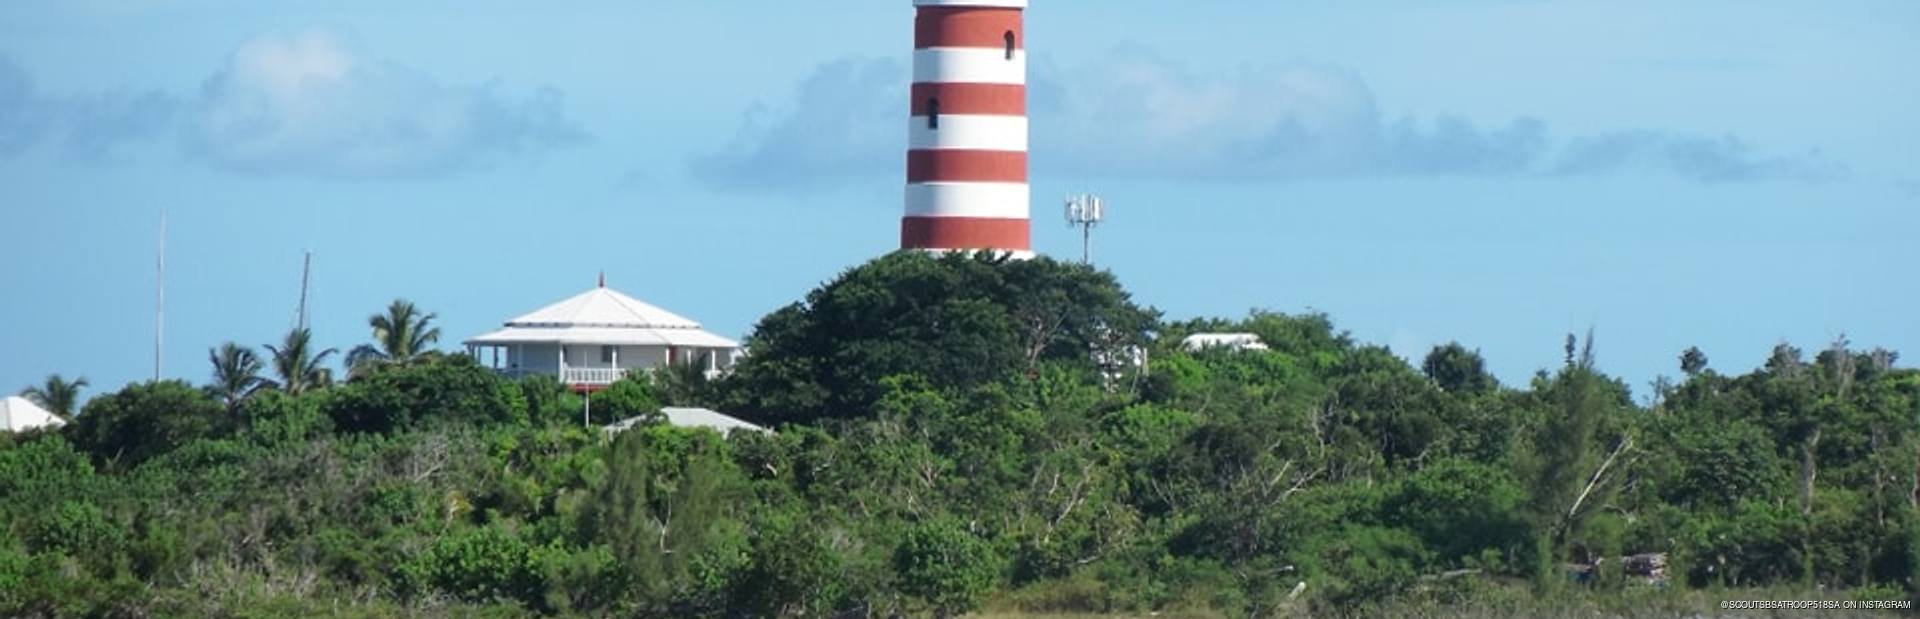 Hope Town Lighthouse Image 1